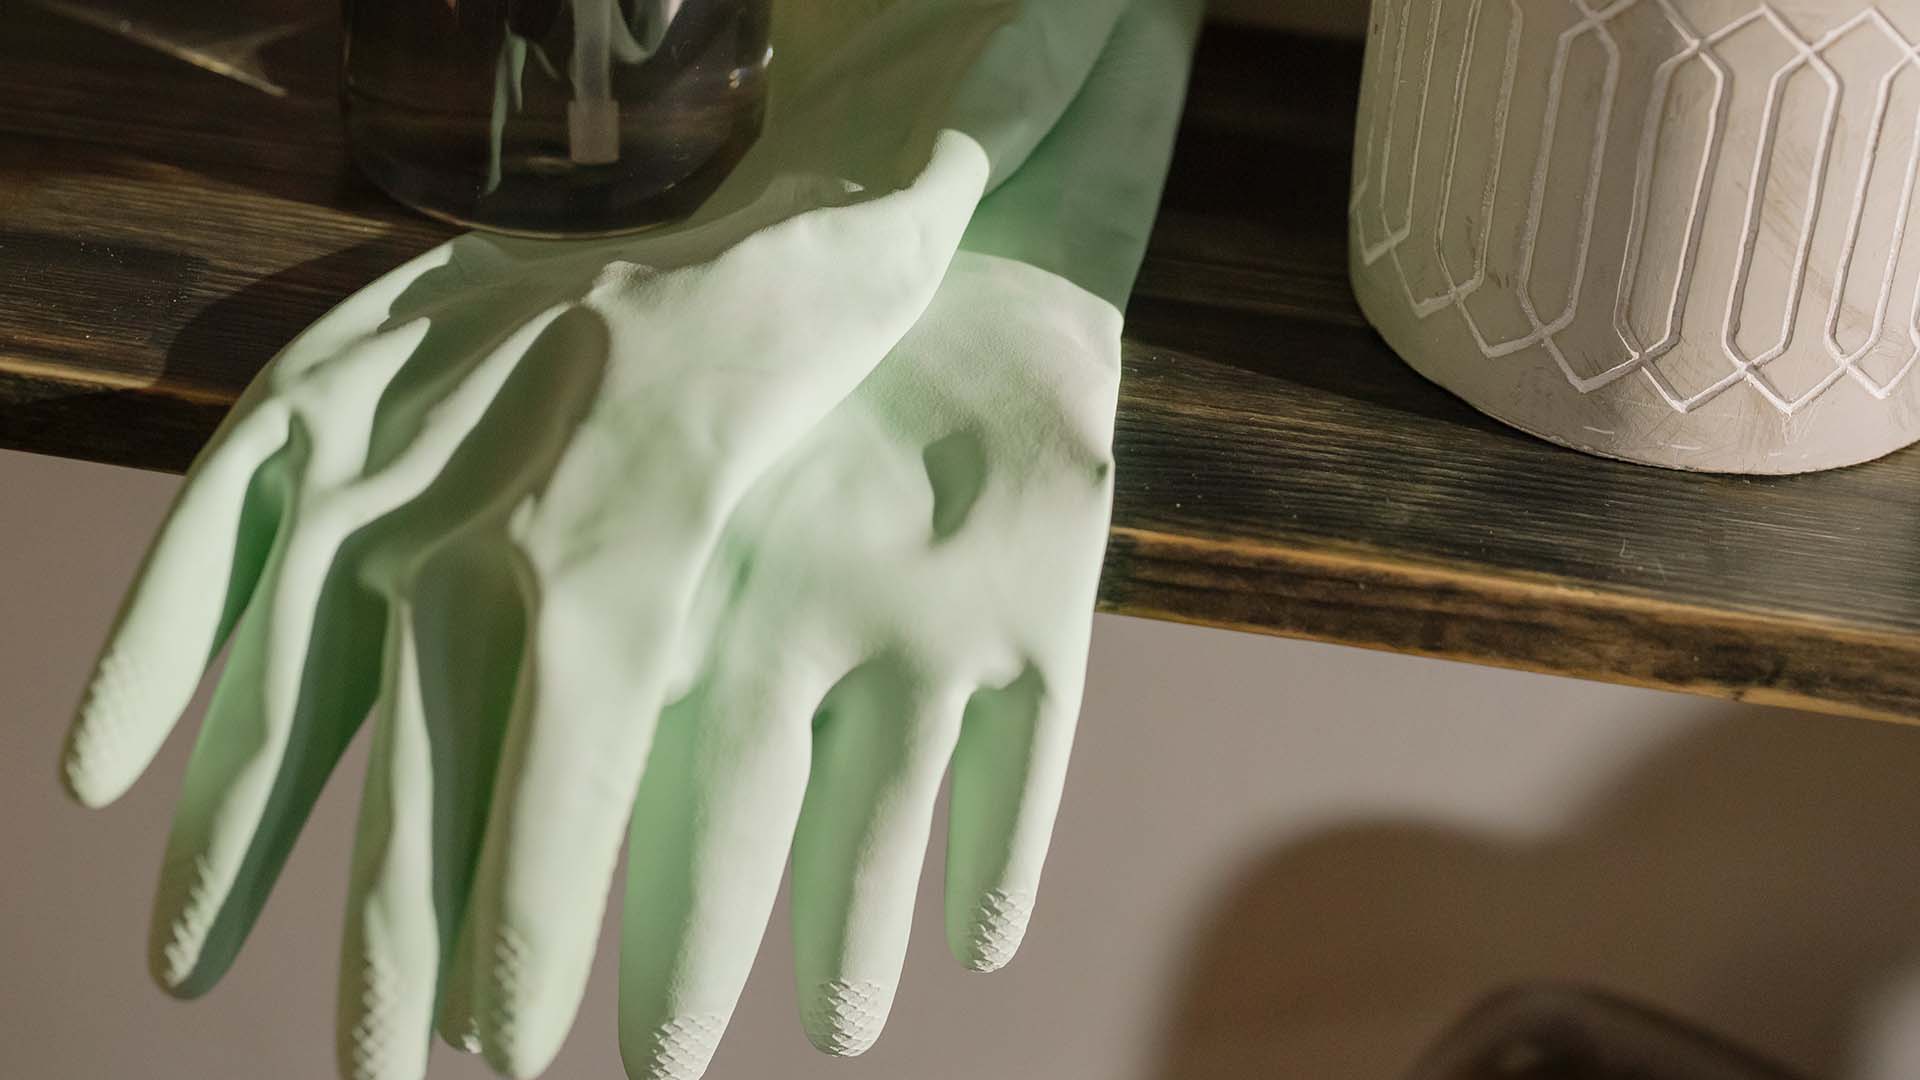 latex gloves in between a black bottle and white plant pot